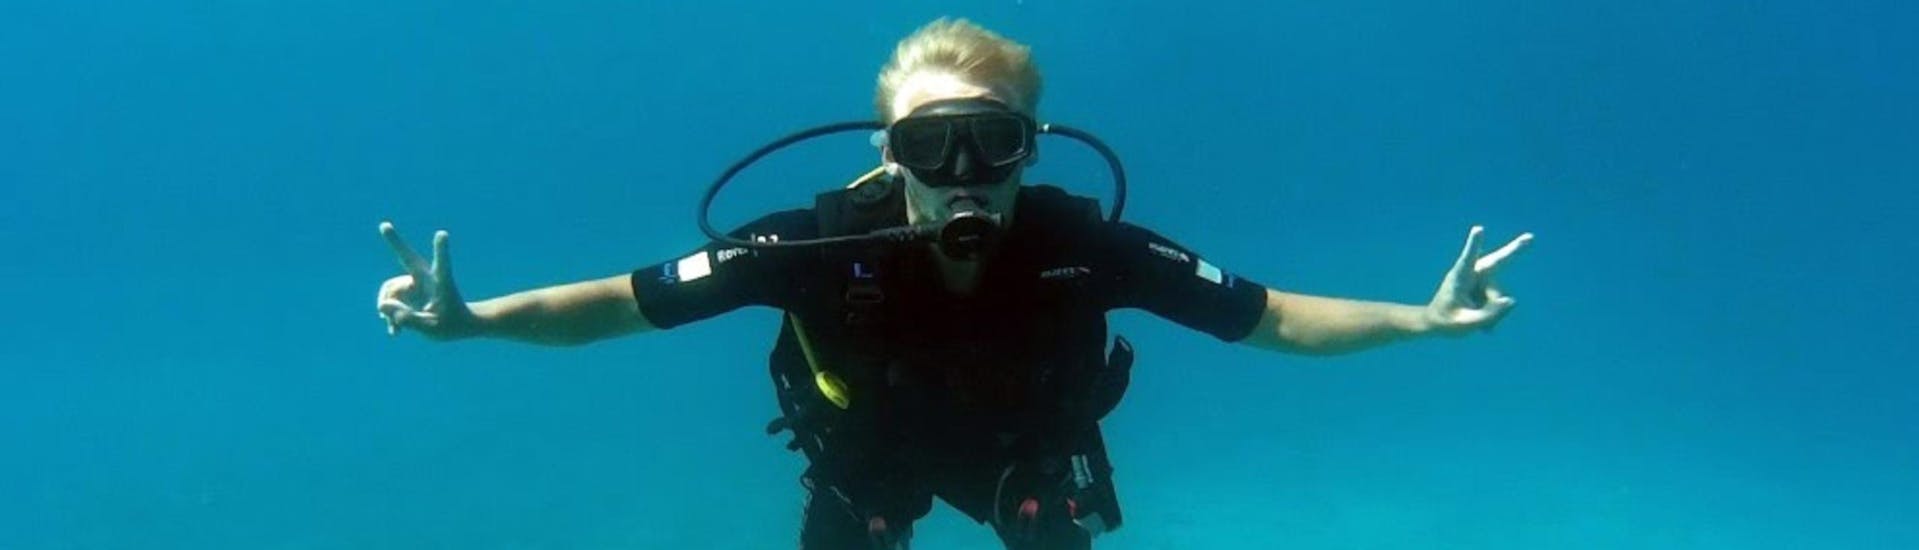  Scuba Diving Course for Beginners - SSI Basic Diver.